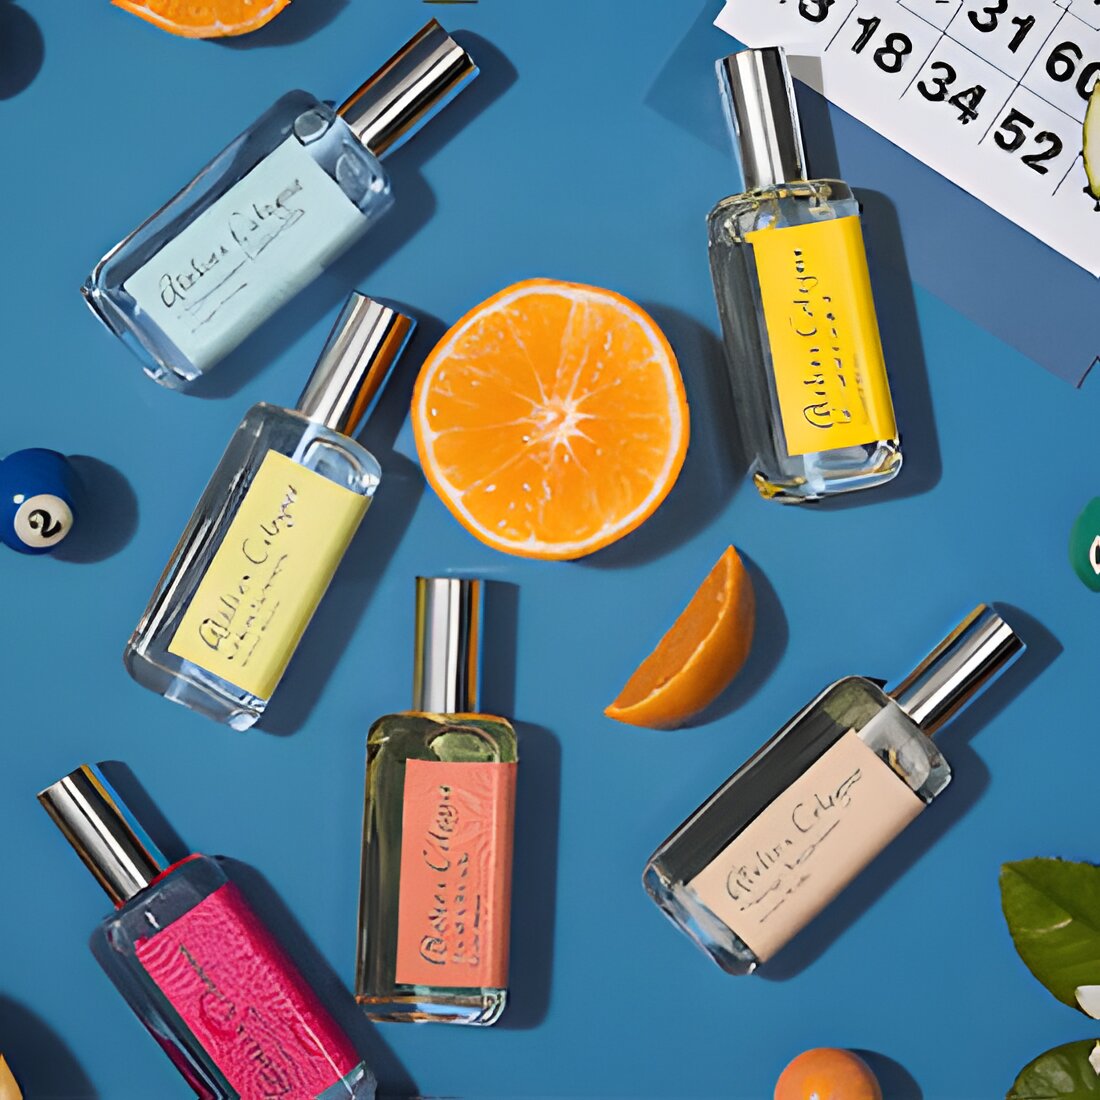 Free Perfume Samples by Atelier Cologne